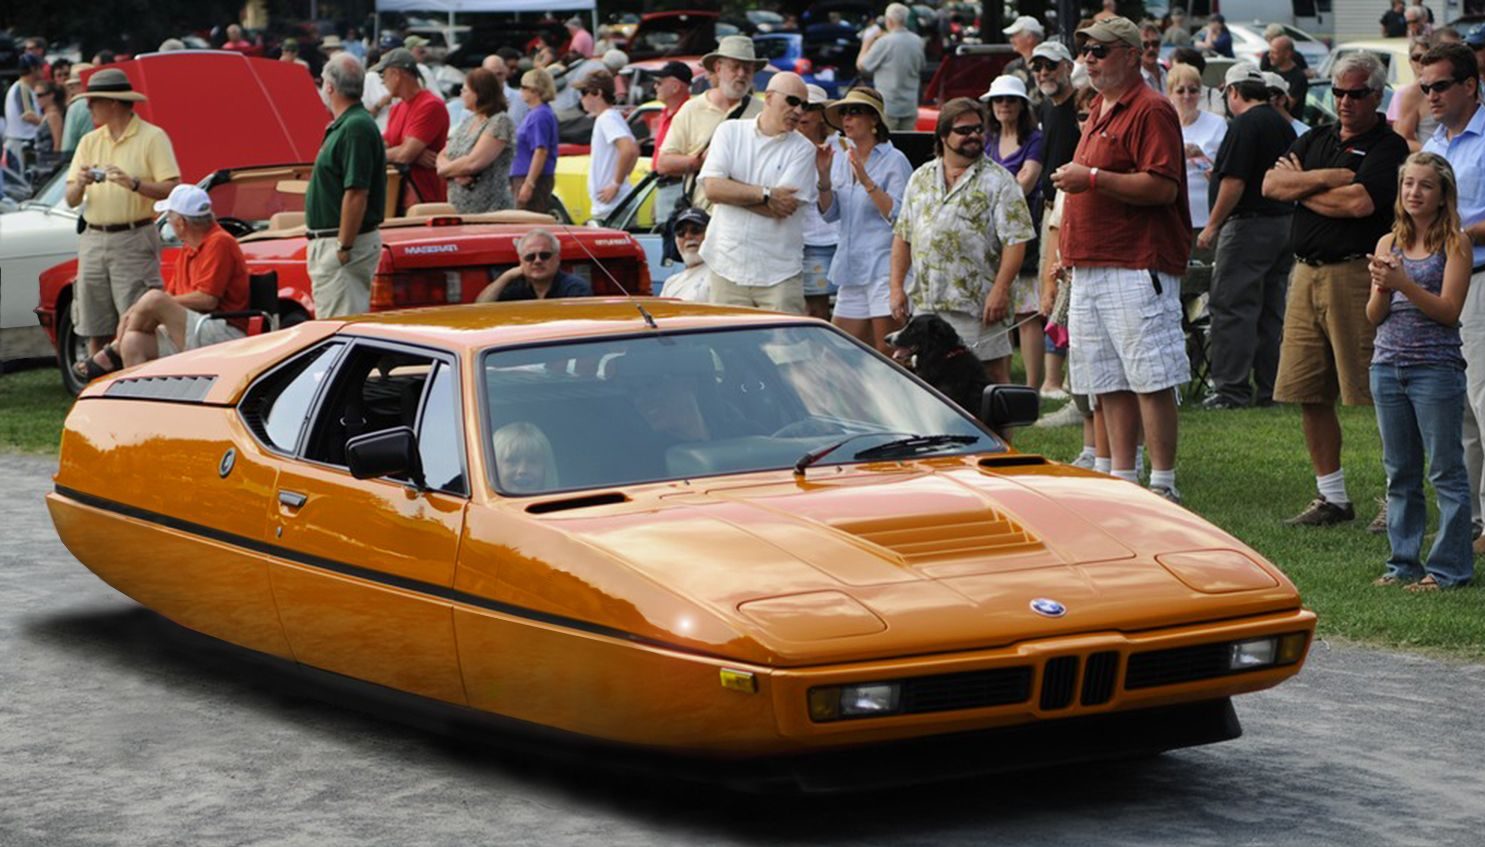 1980 BMW M1 Mod - 10 Photos Of The Most Unusual And Odd Cars In The World